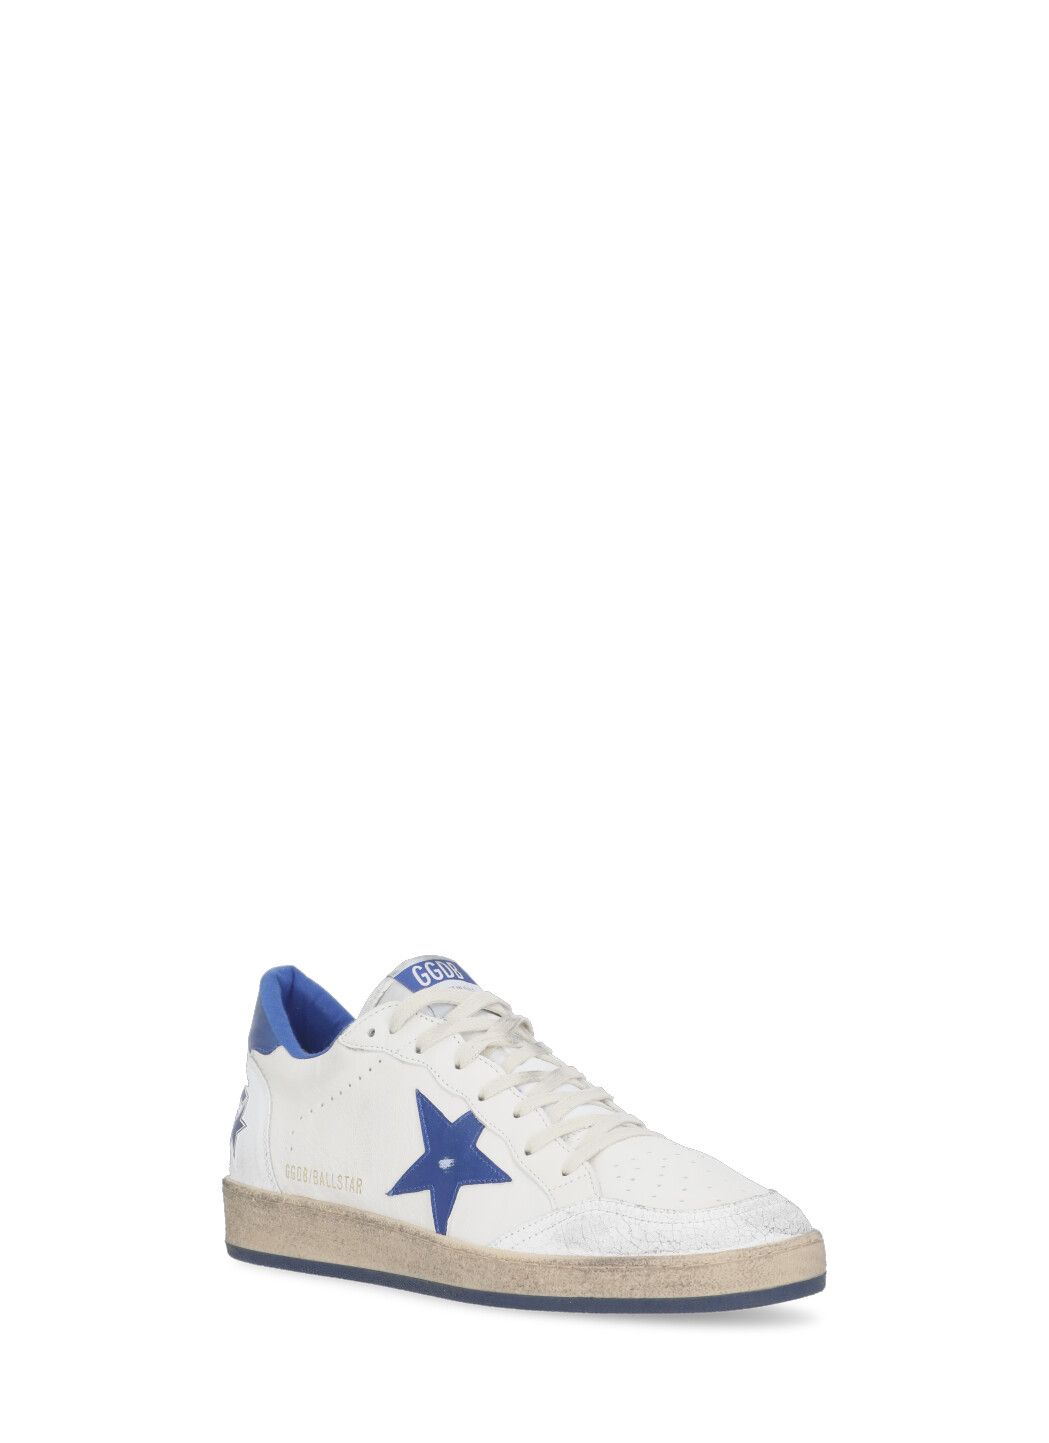 Ball Star sneakers